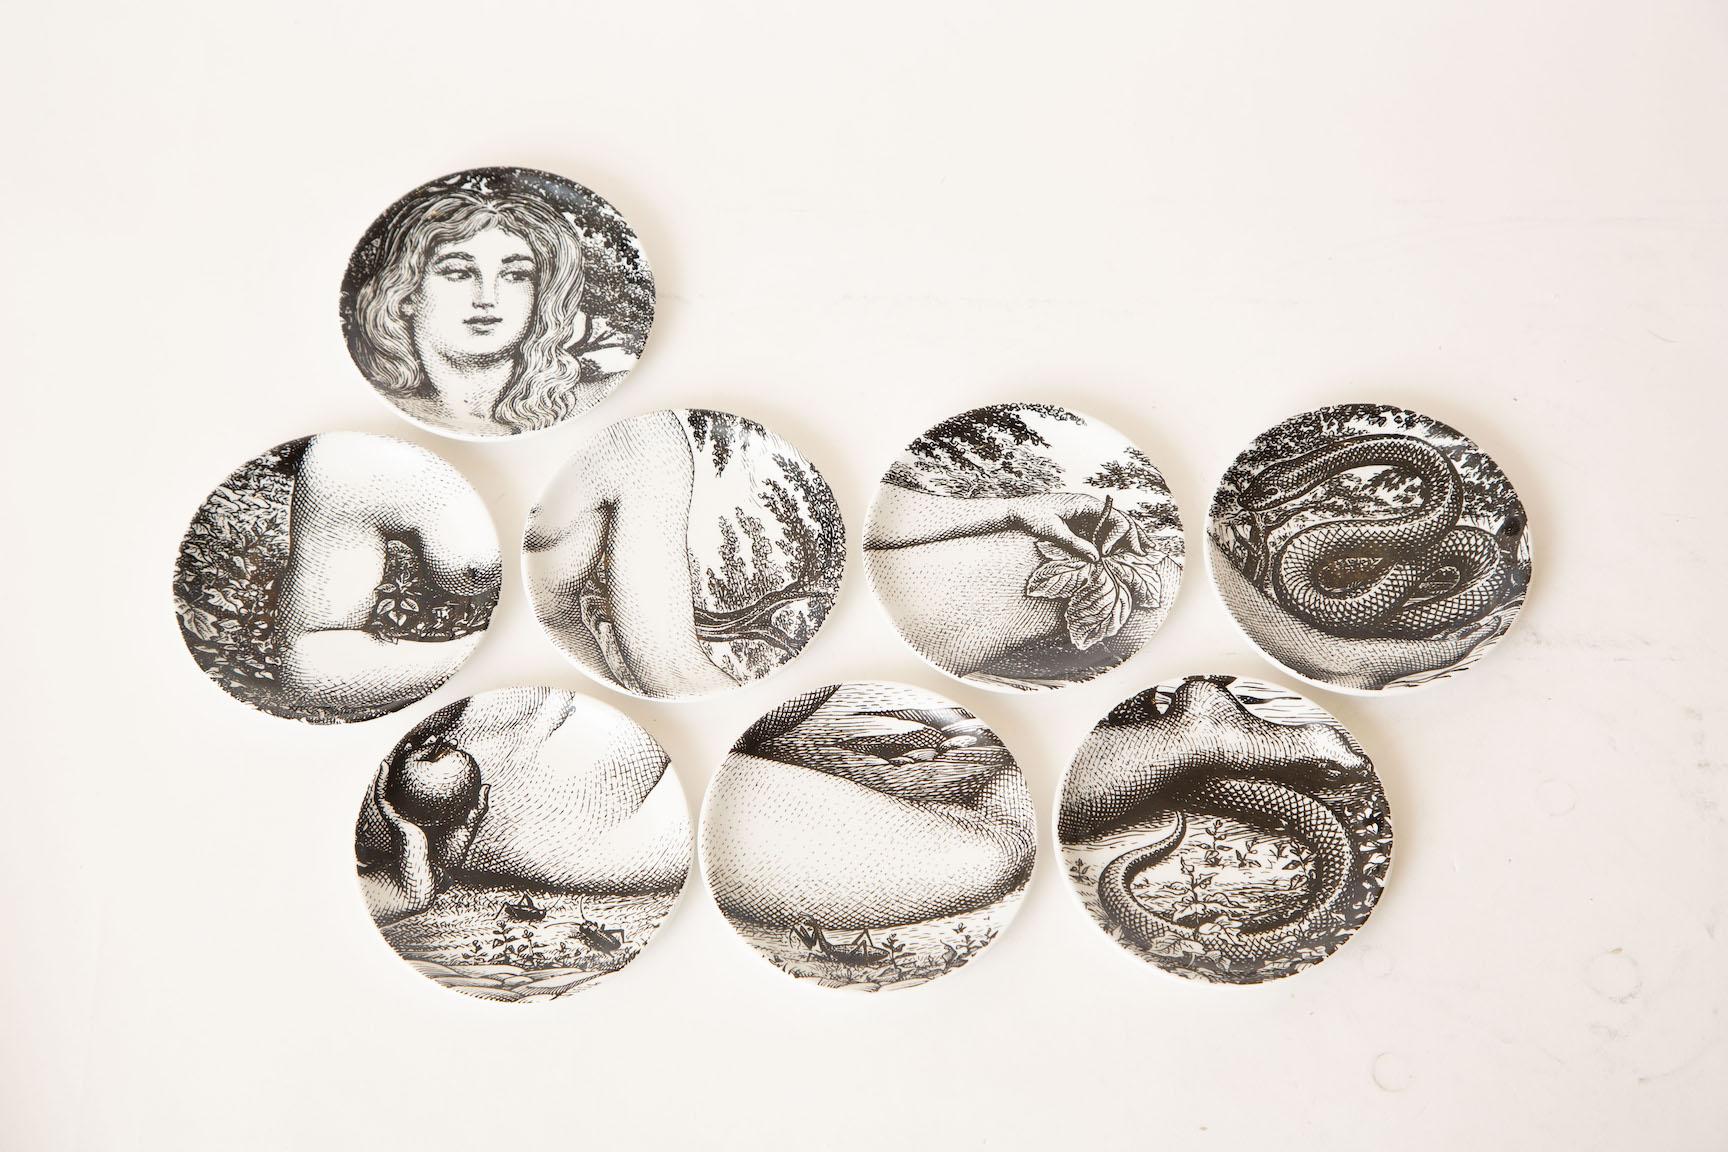 This vintage set of 8 Piero Fornasetti black and white porcelain coasters are the interplay of the creation of Eve as in Adam and Eve. They are Mid-Century Modern, Italian and all numbered and hallmarked on the back. Great barware. These can also be